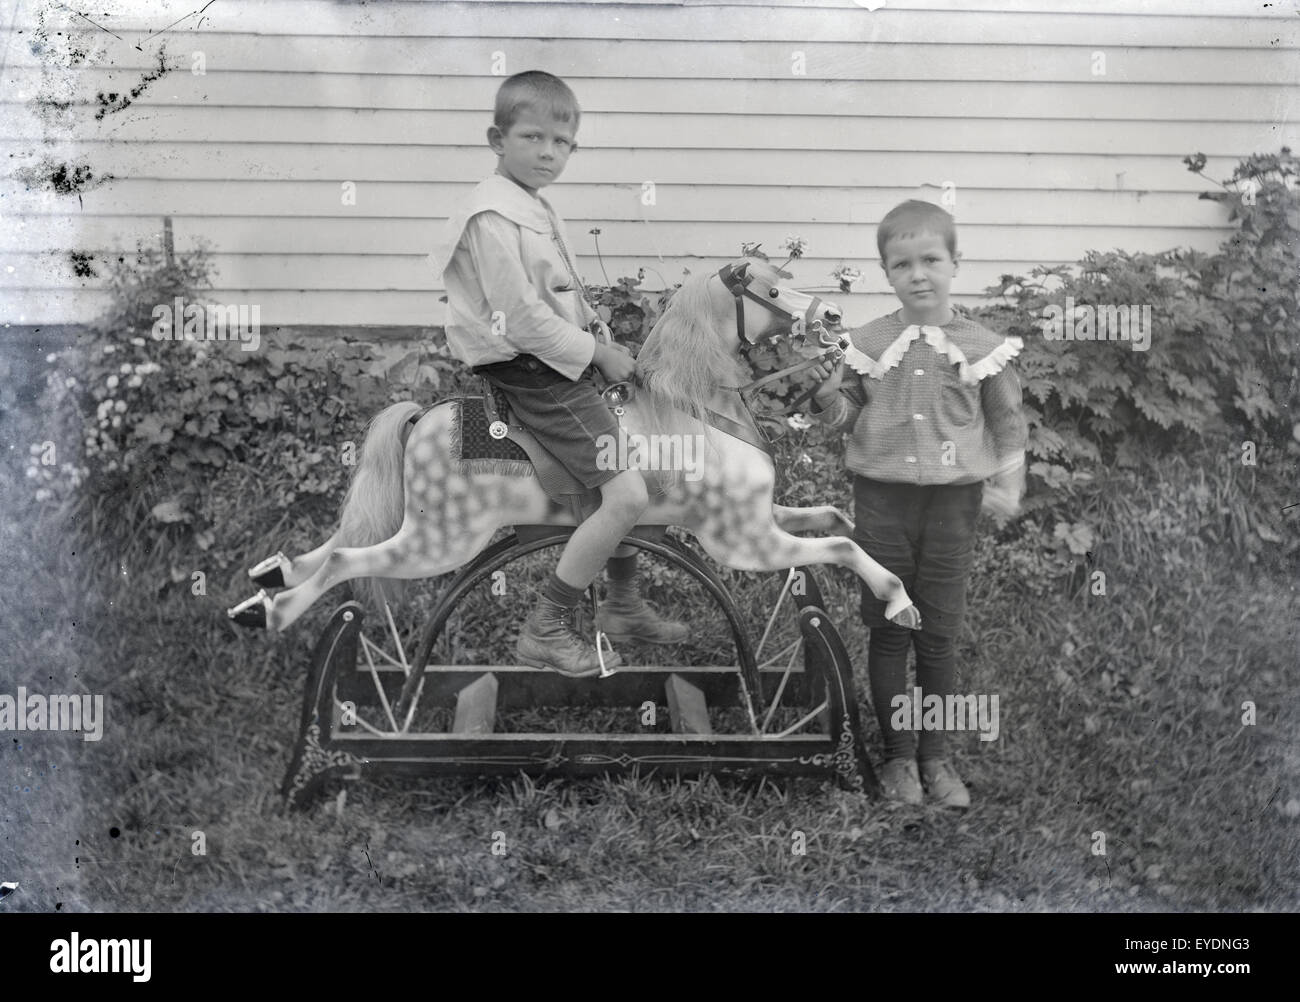 Antique c1900 photograph of two boys, probably brothers or twins, showing off their new Victorian rocking horse. Location is USA. Stock Photo